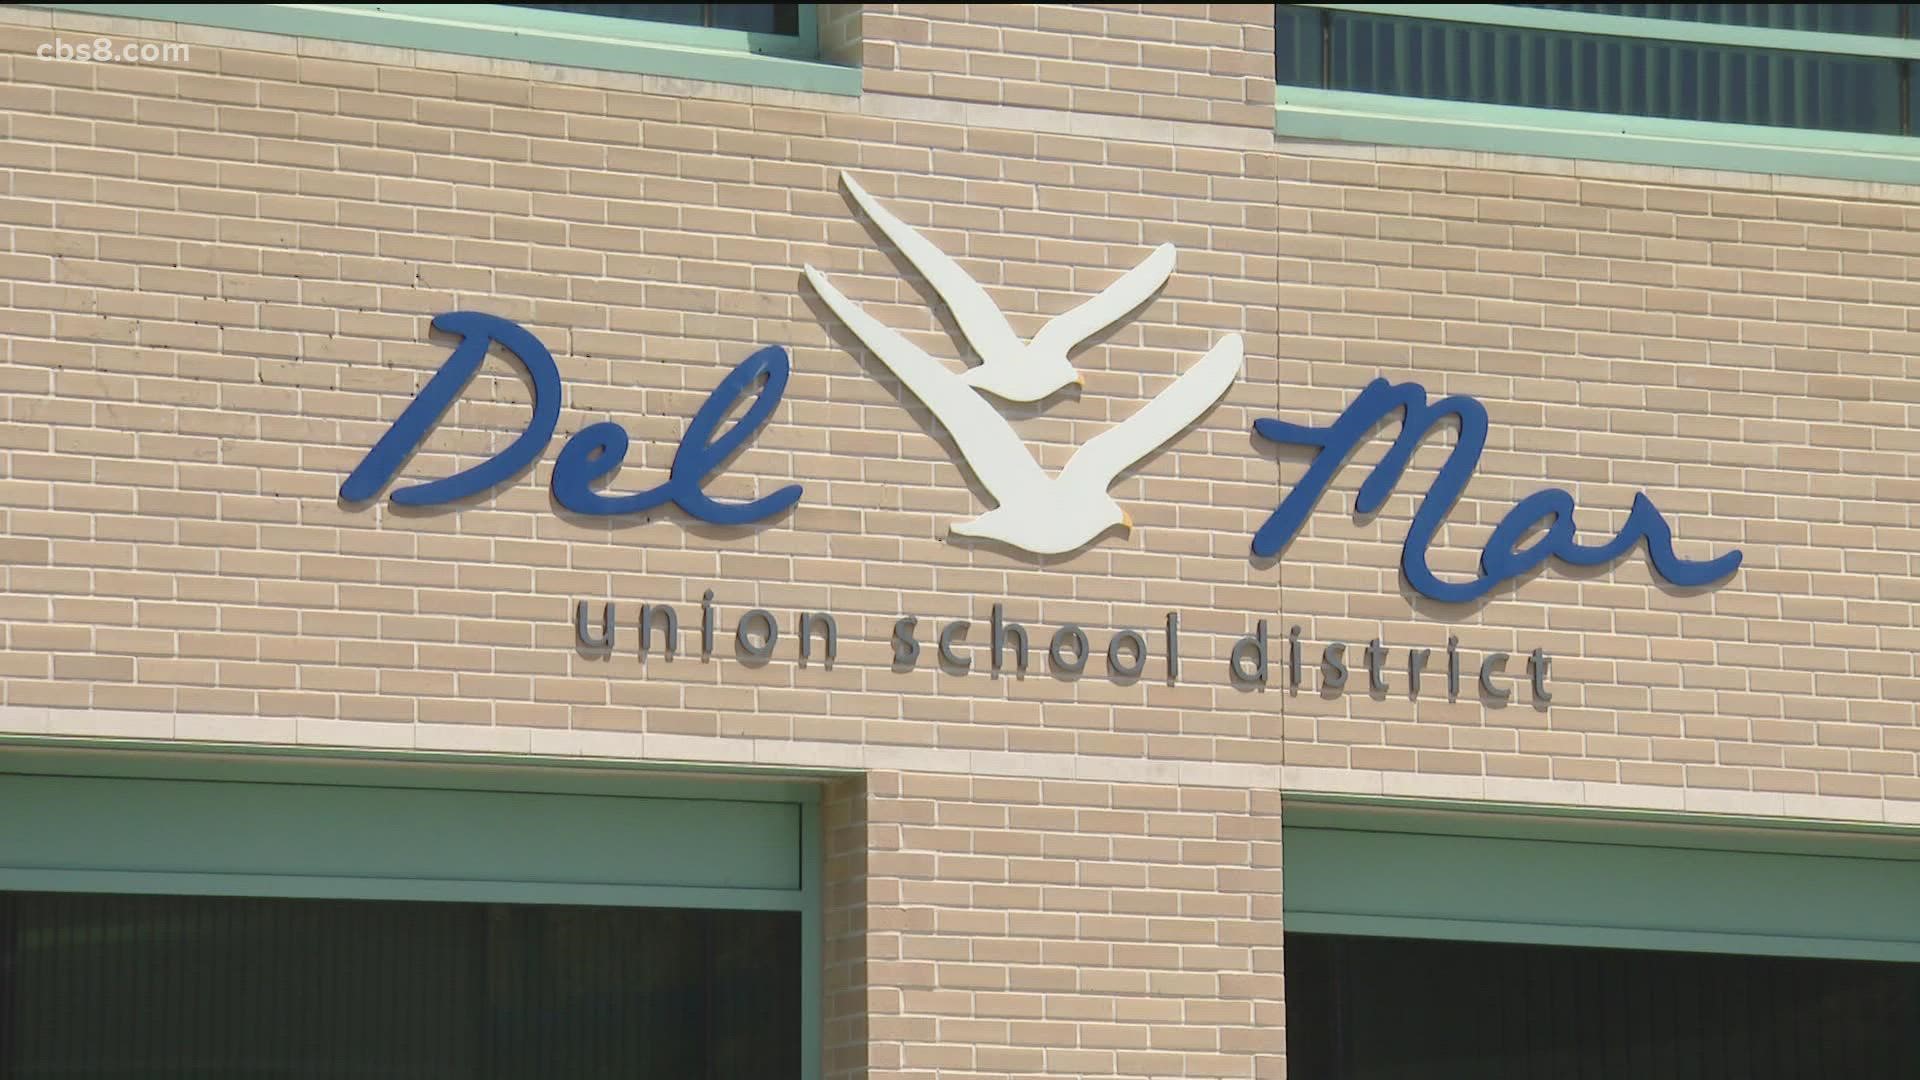 Parents told CBS 8 the district is denying their kids services and will stop at nothing to silence them, as they advocate for their children.